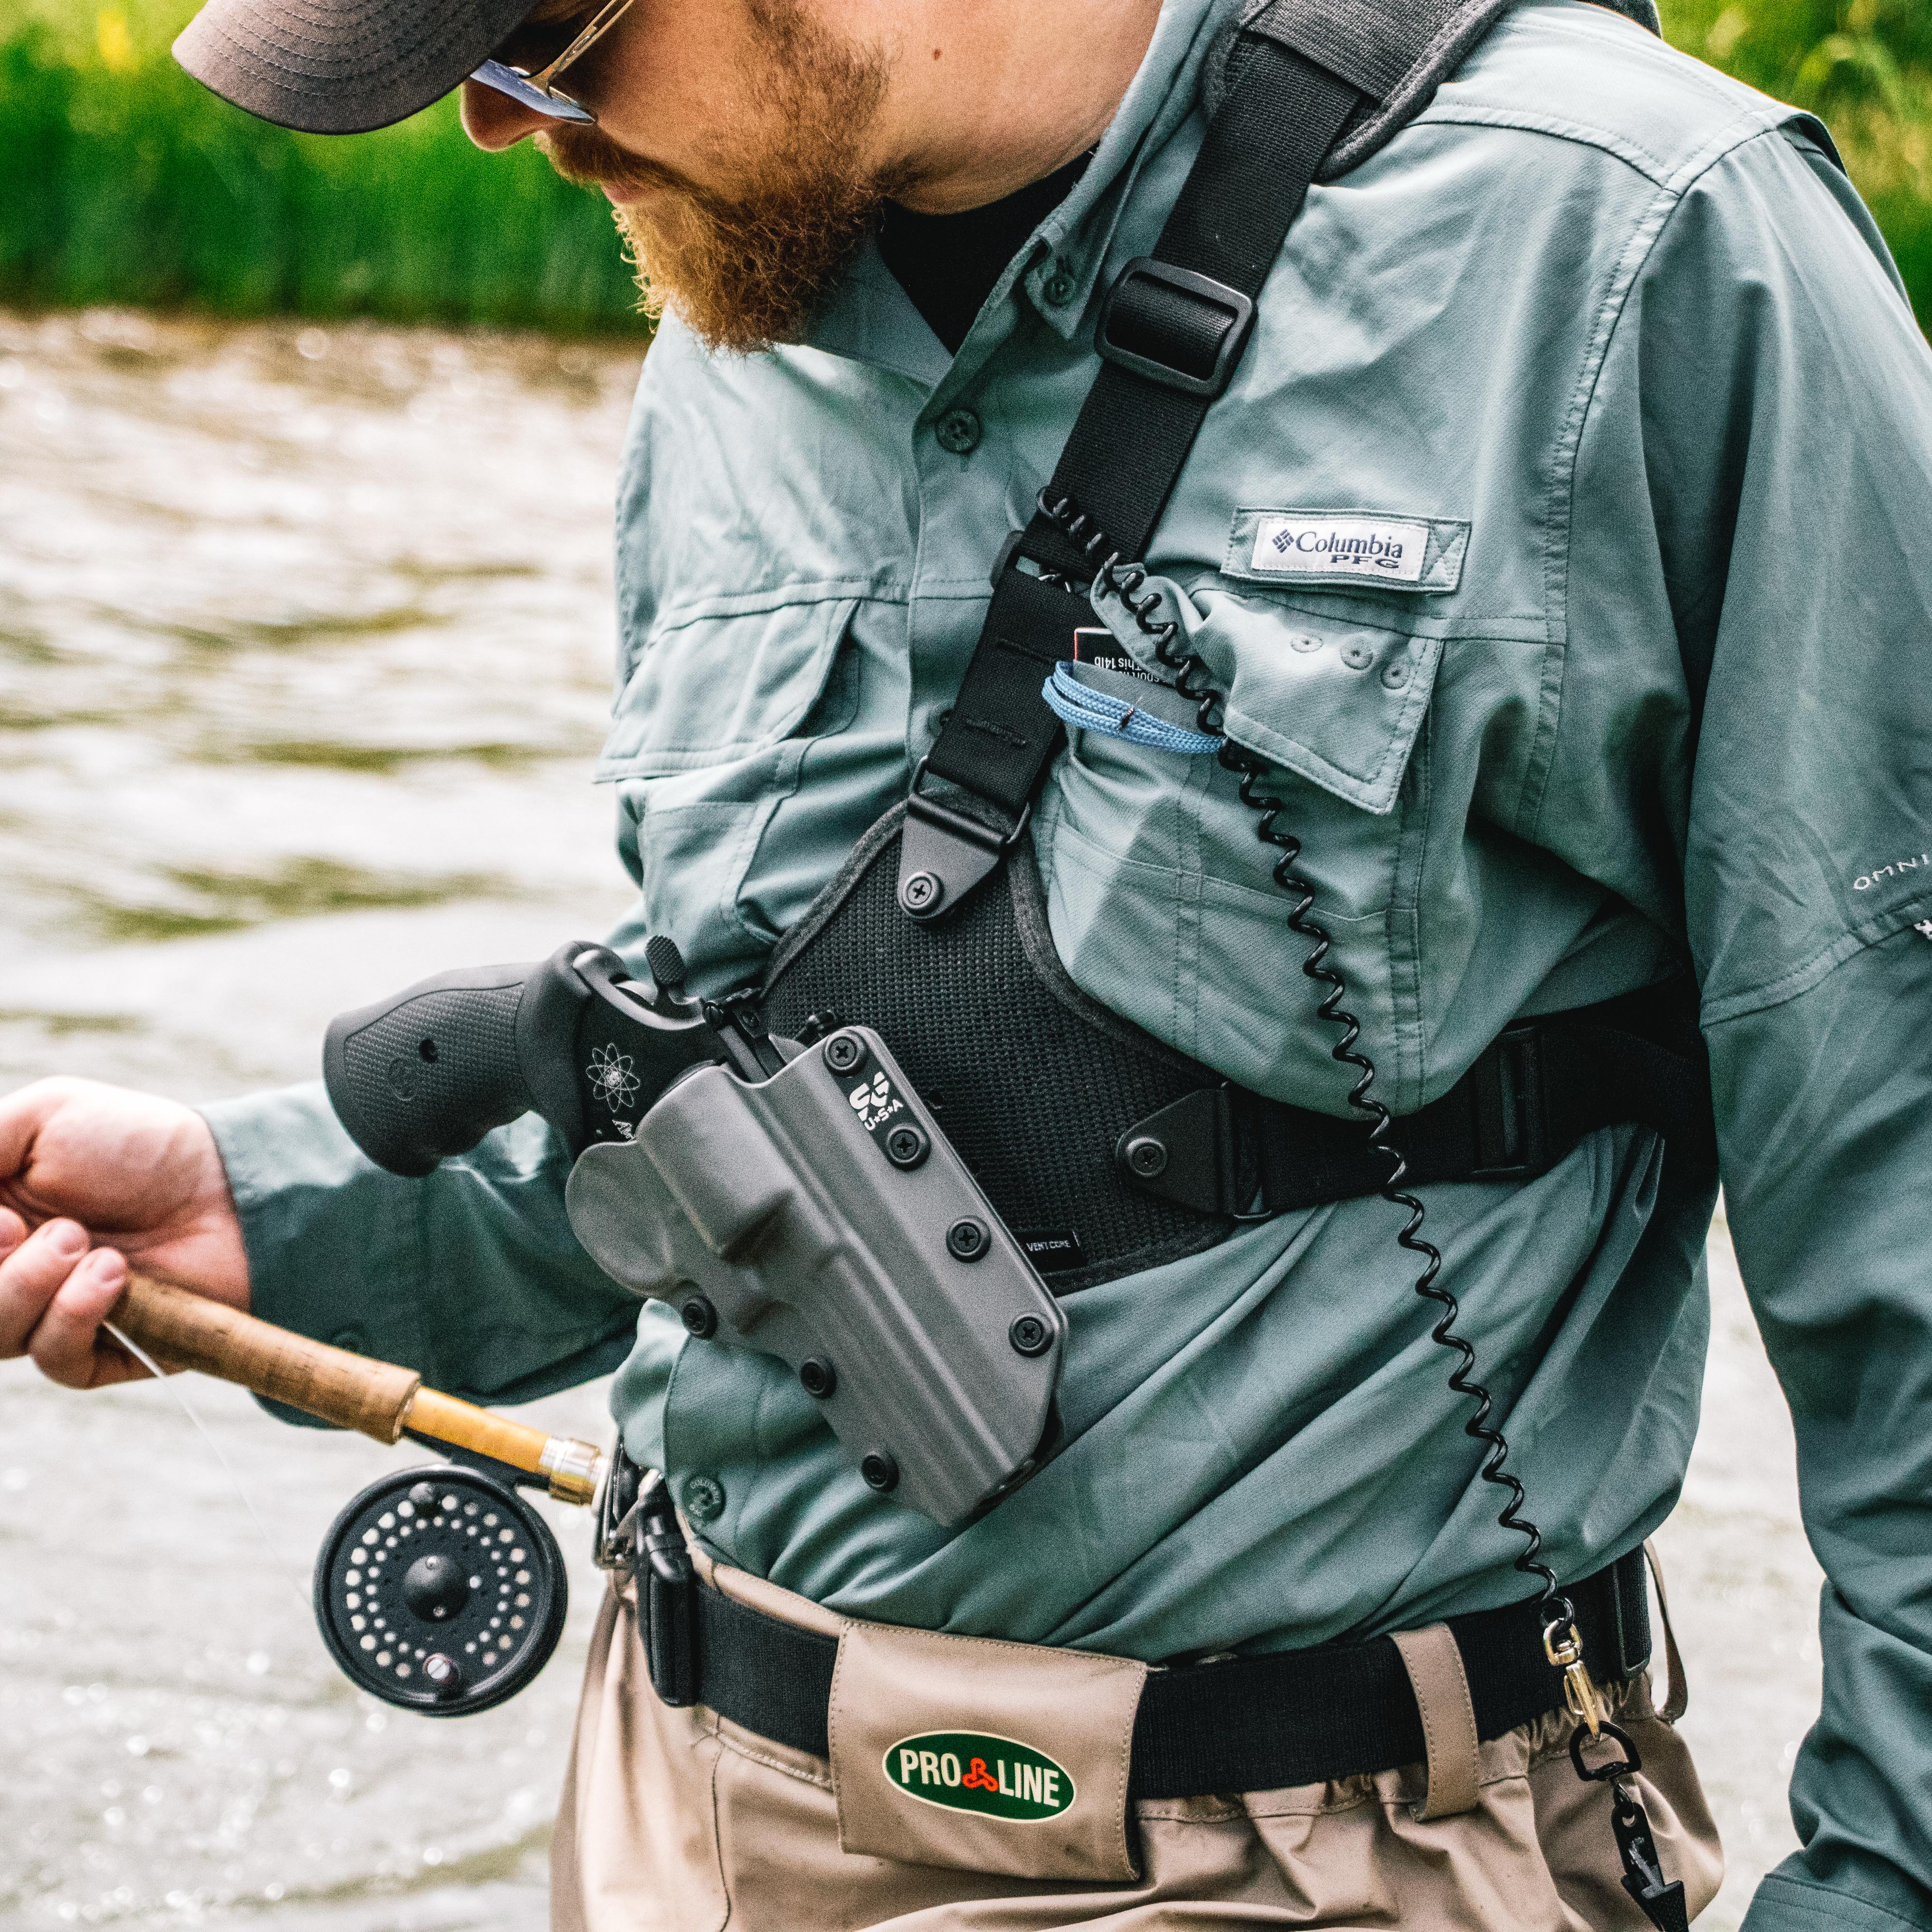 https://stealthgearusa.com/product_images/uploaded_images/stealthgearusa-flyfishing-al-diamondforkimg-3925.jpg